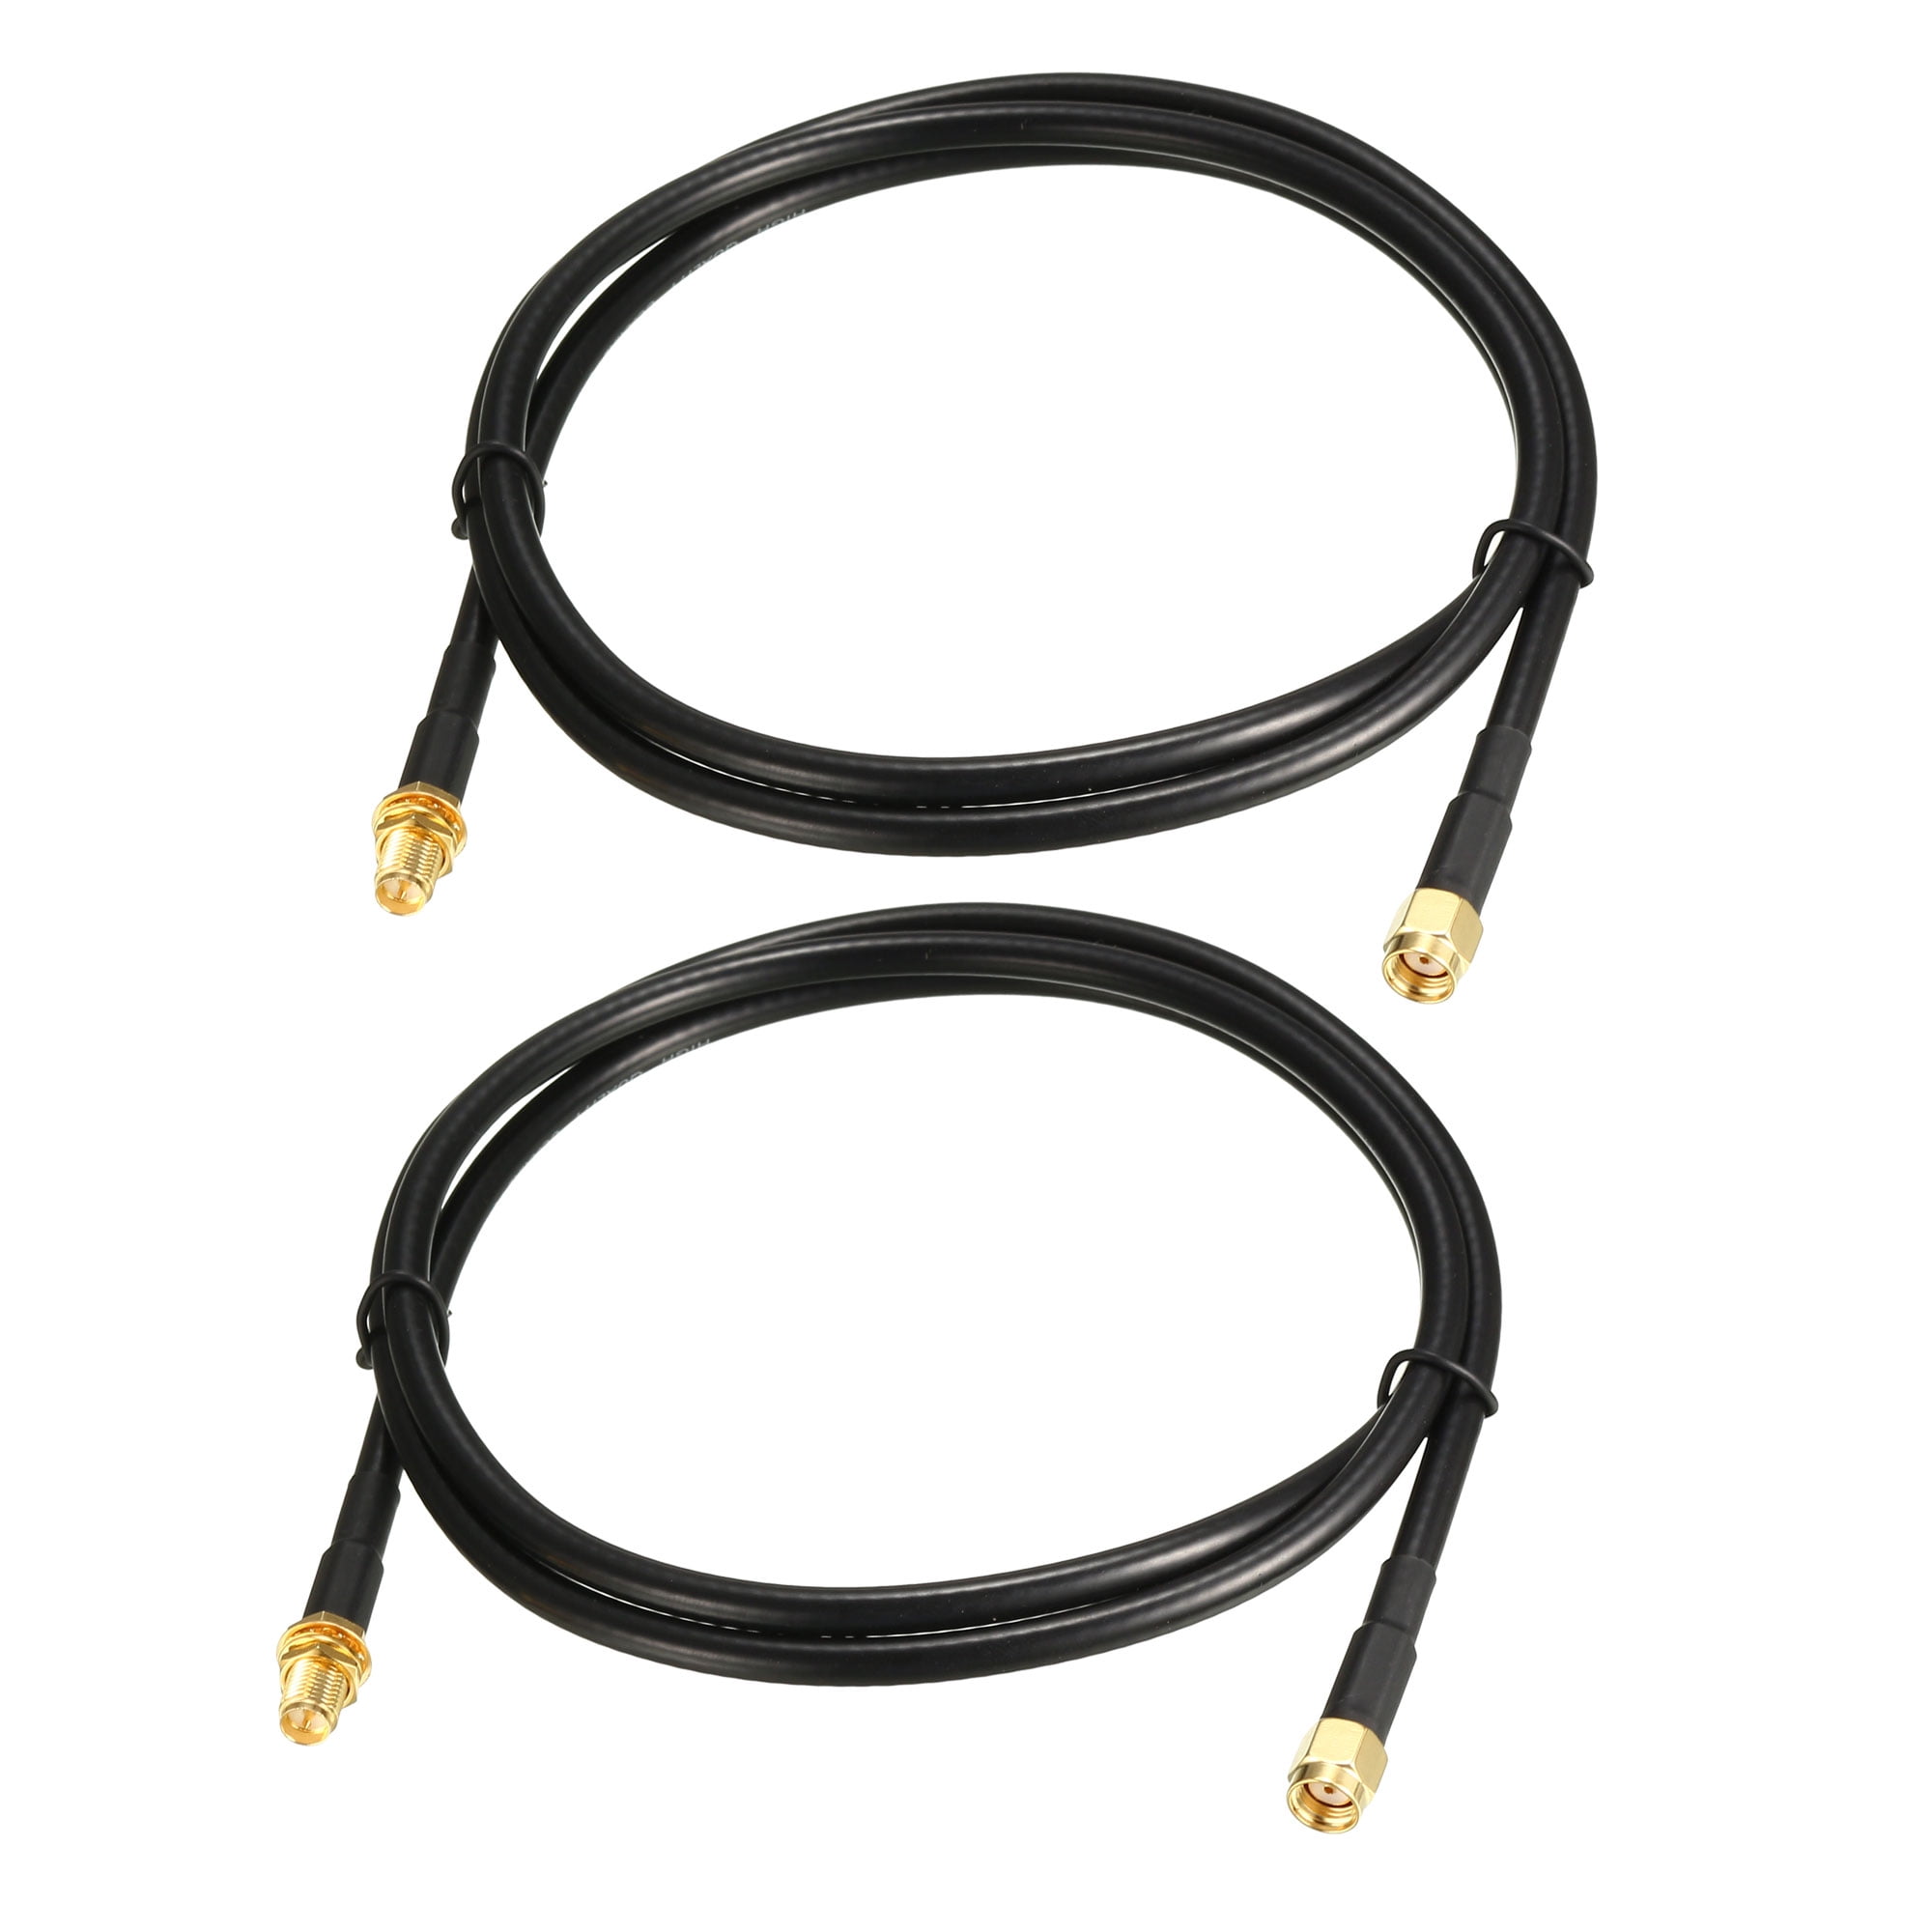 uxcell Antenna Extension Cable RP-SMA Male to RP-SMA Female Low Loss RG174 15 ft 2pcs 